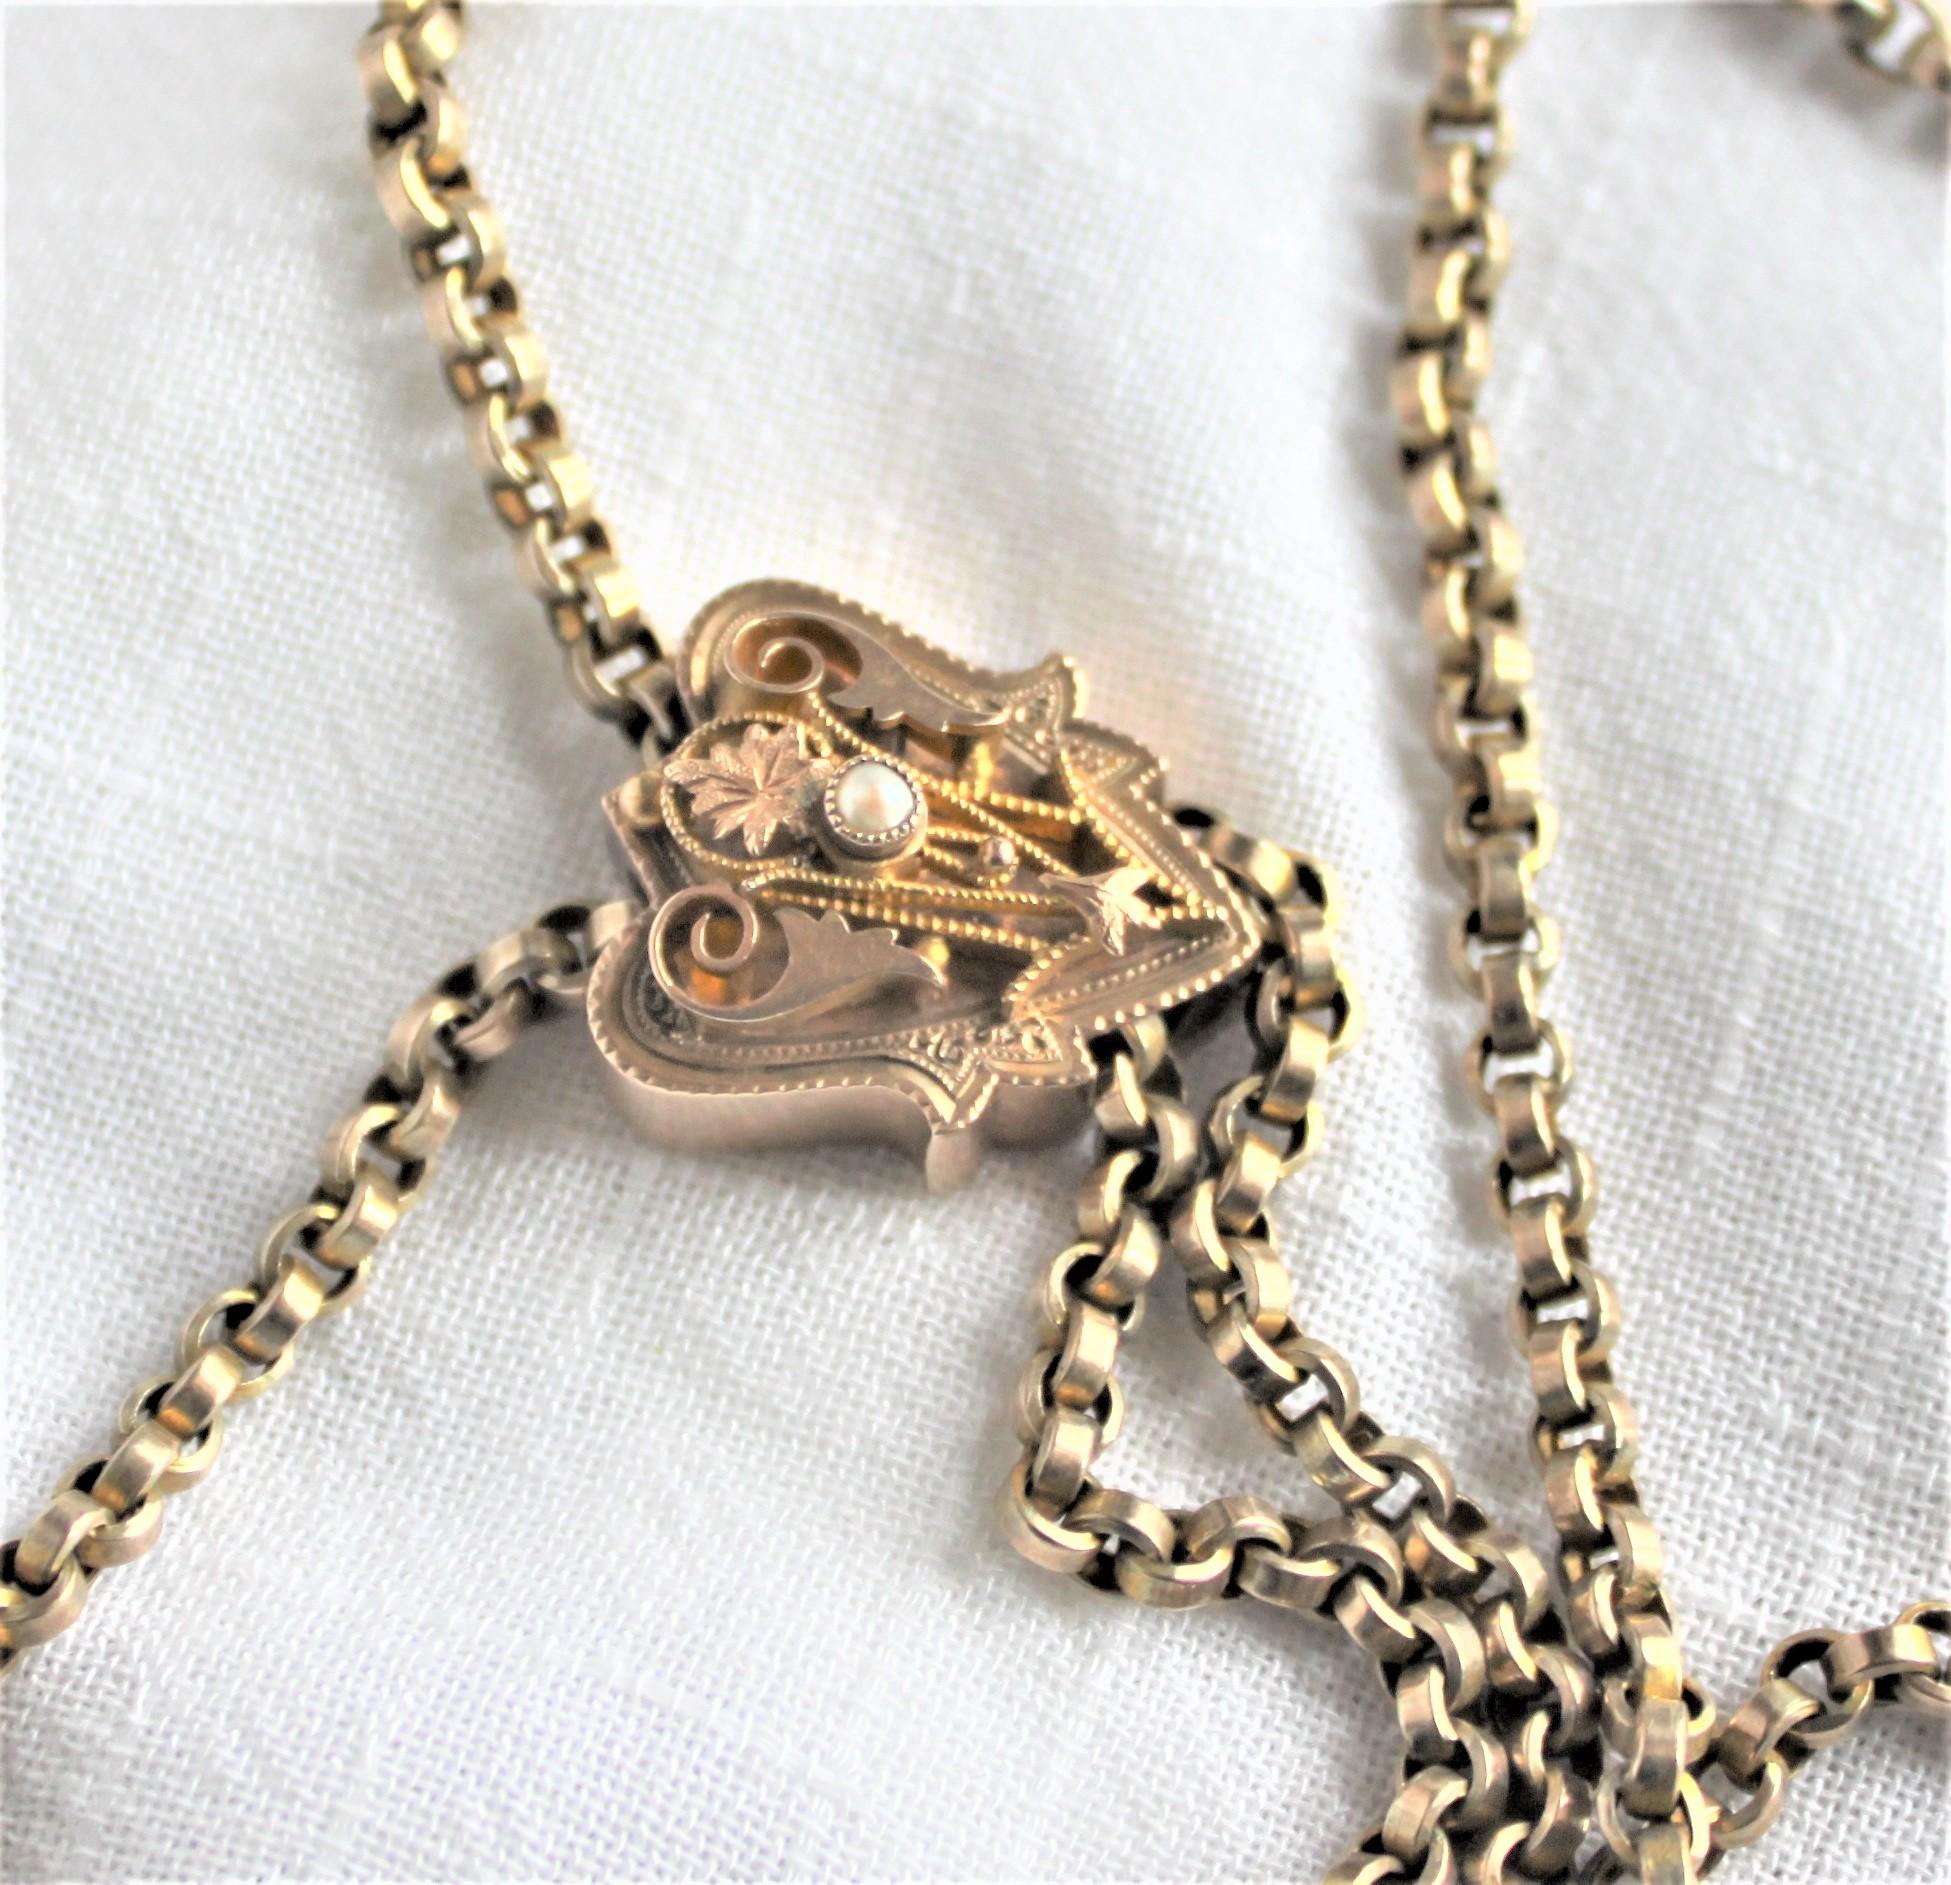 Hand-Crafted Antique Edwardian 9-Karat Yellow Gold Slide Watch Chain Necklace & Key For Sale